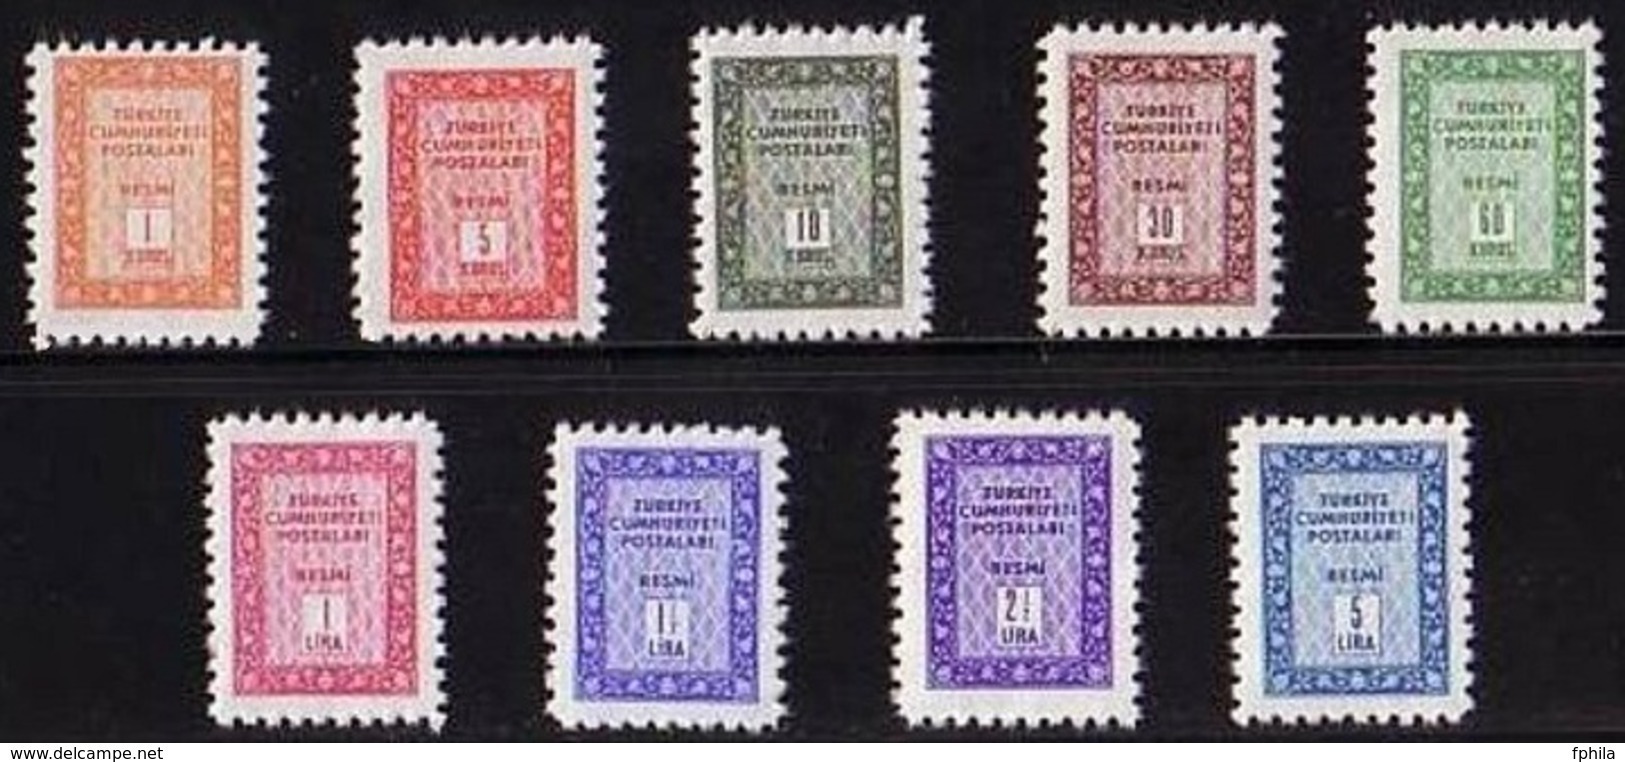 1960 TURKEY OFFICIAL STAMPS MNH ** - Official Stamps